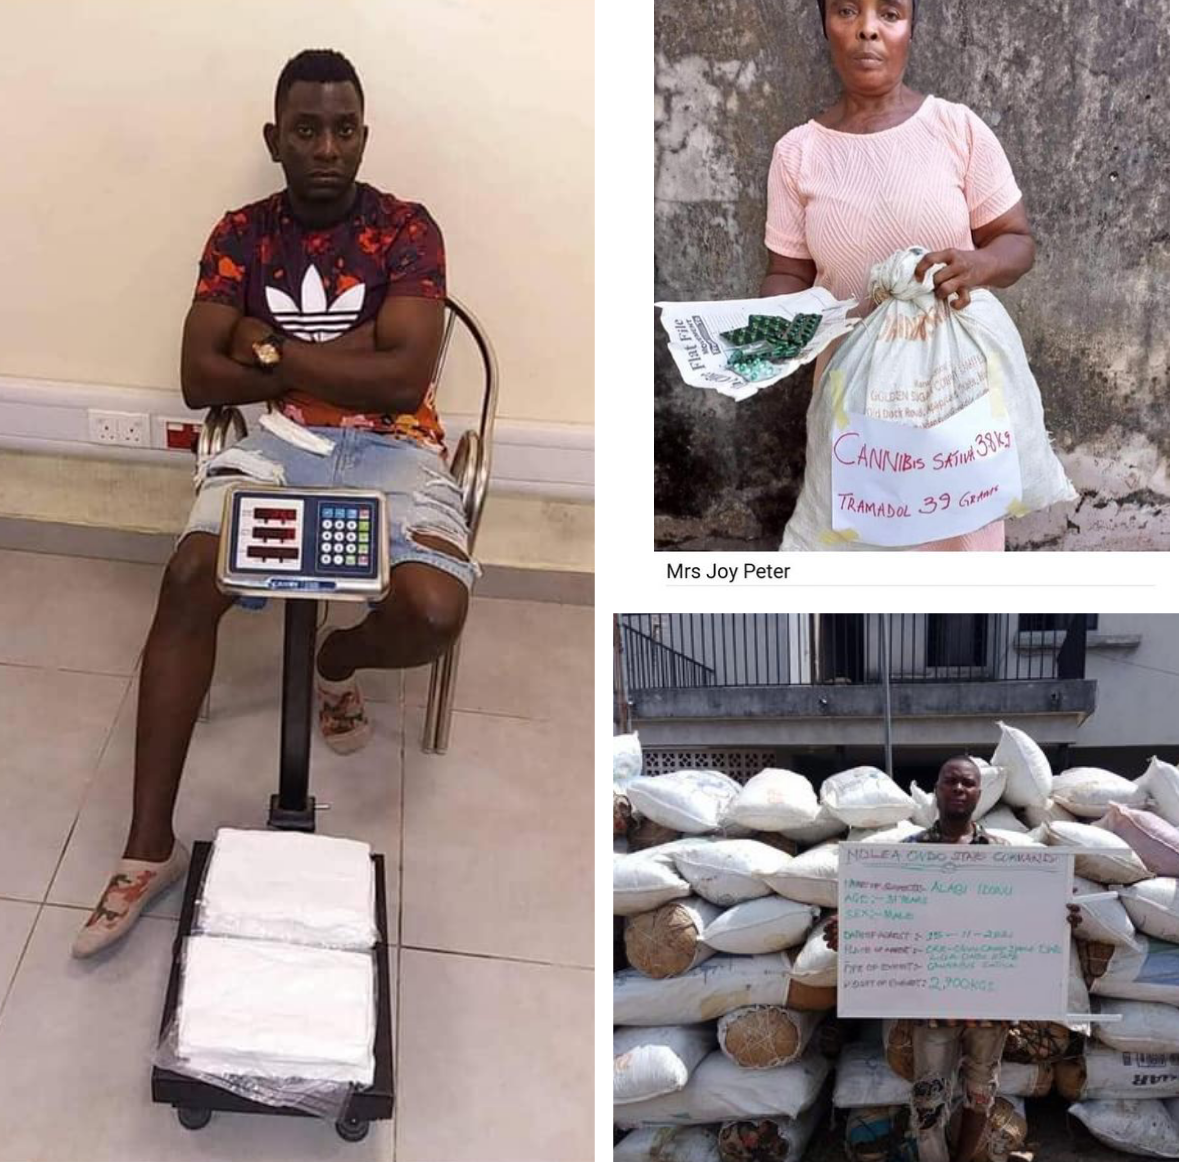 Brazil-based drug dealer behind cocaine hidden in Lagos airport toilet arrested as NDLEA recovers 6,043.857kg narcotics from fake security agent